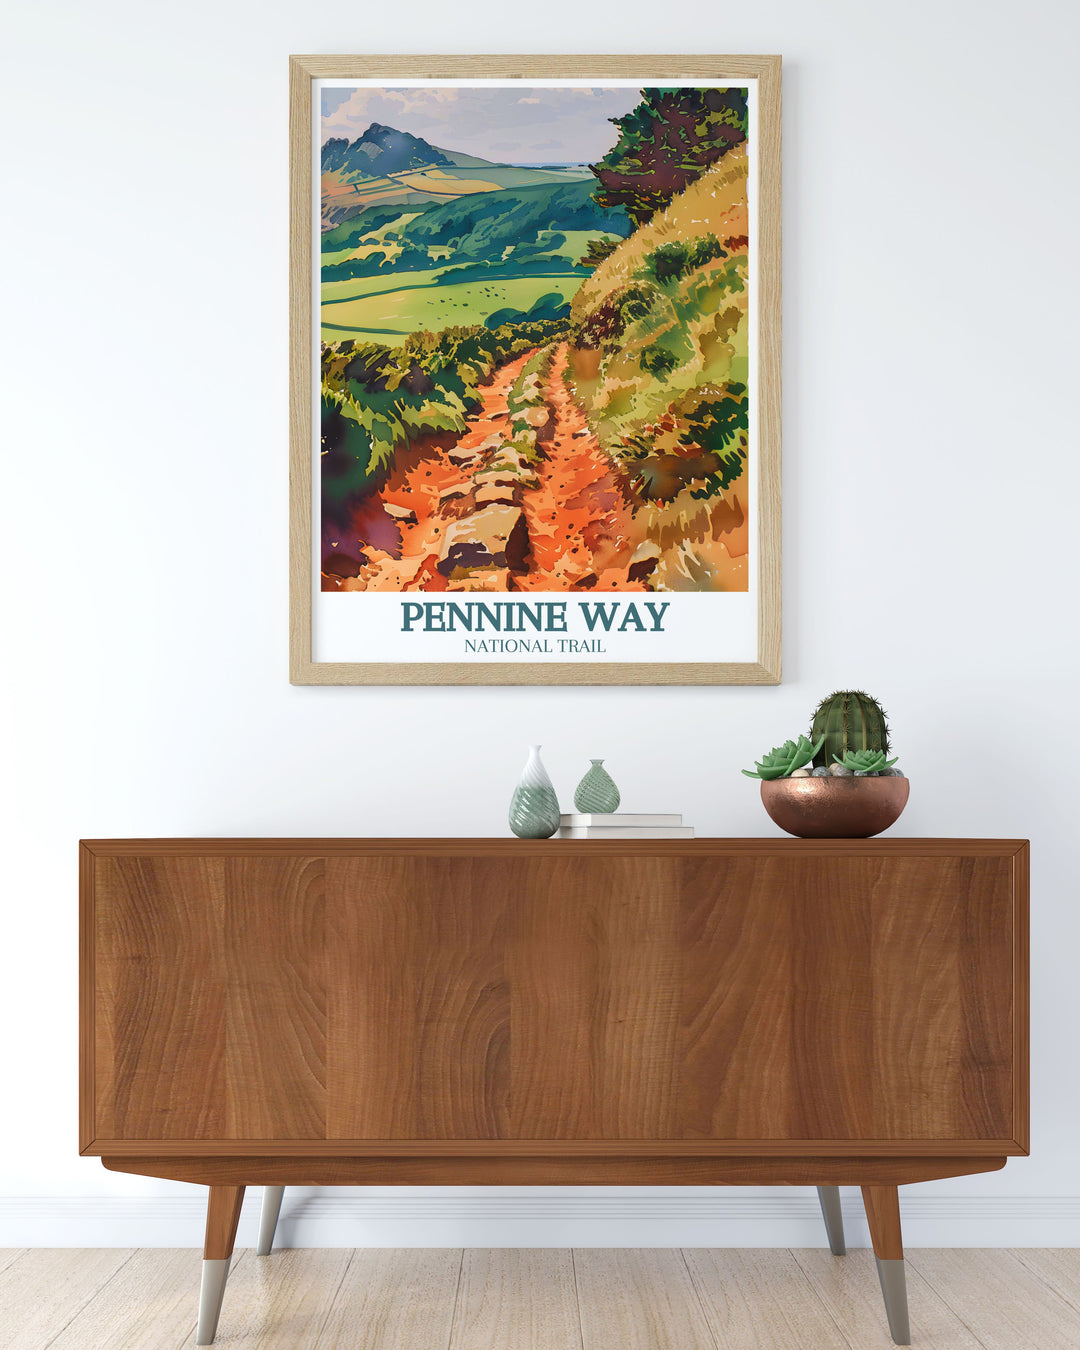 Framed Print of the Pennines offering a stunning visual representation of this iconic region perfect for enhancing your home interiors and celebrating the beauty of the UK